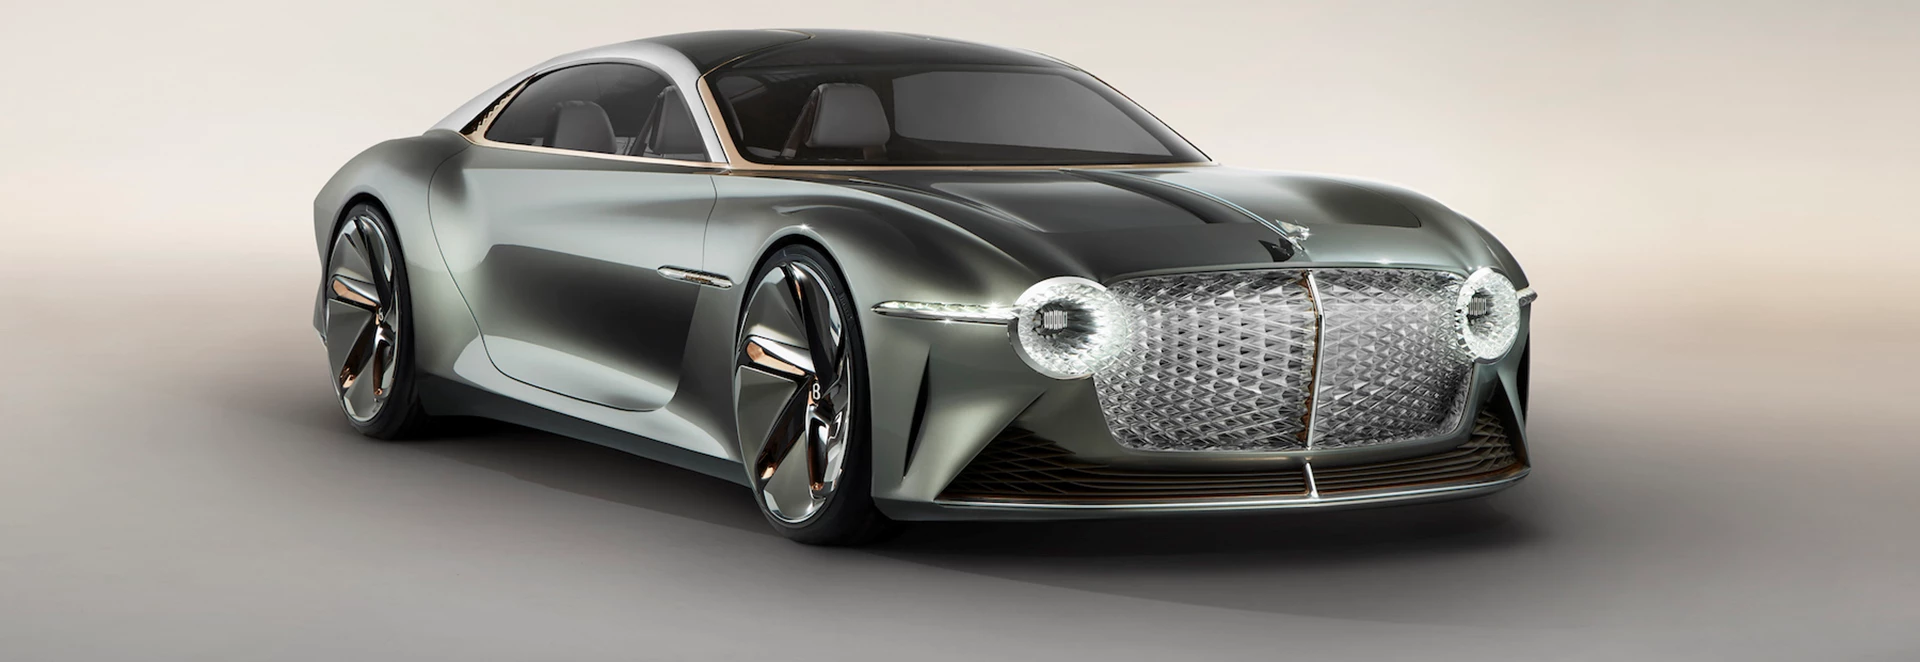 Bentley celebrates centenary with new all-electric concept